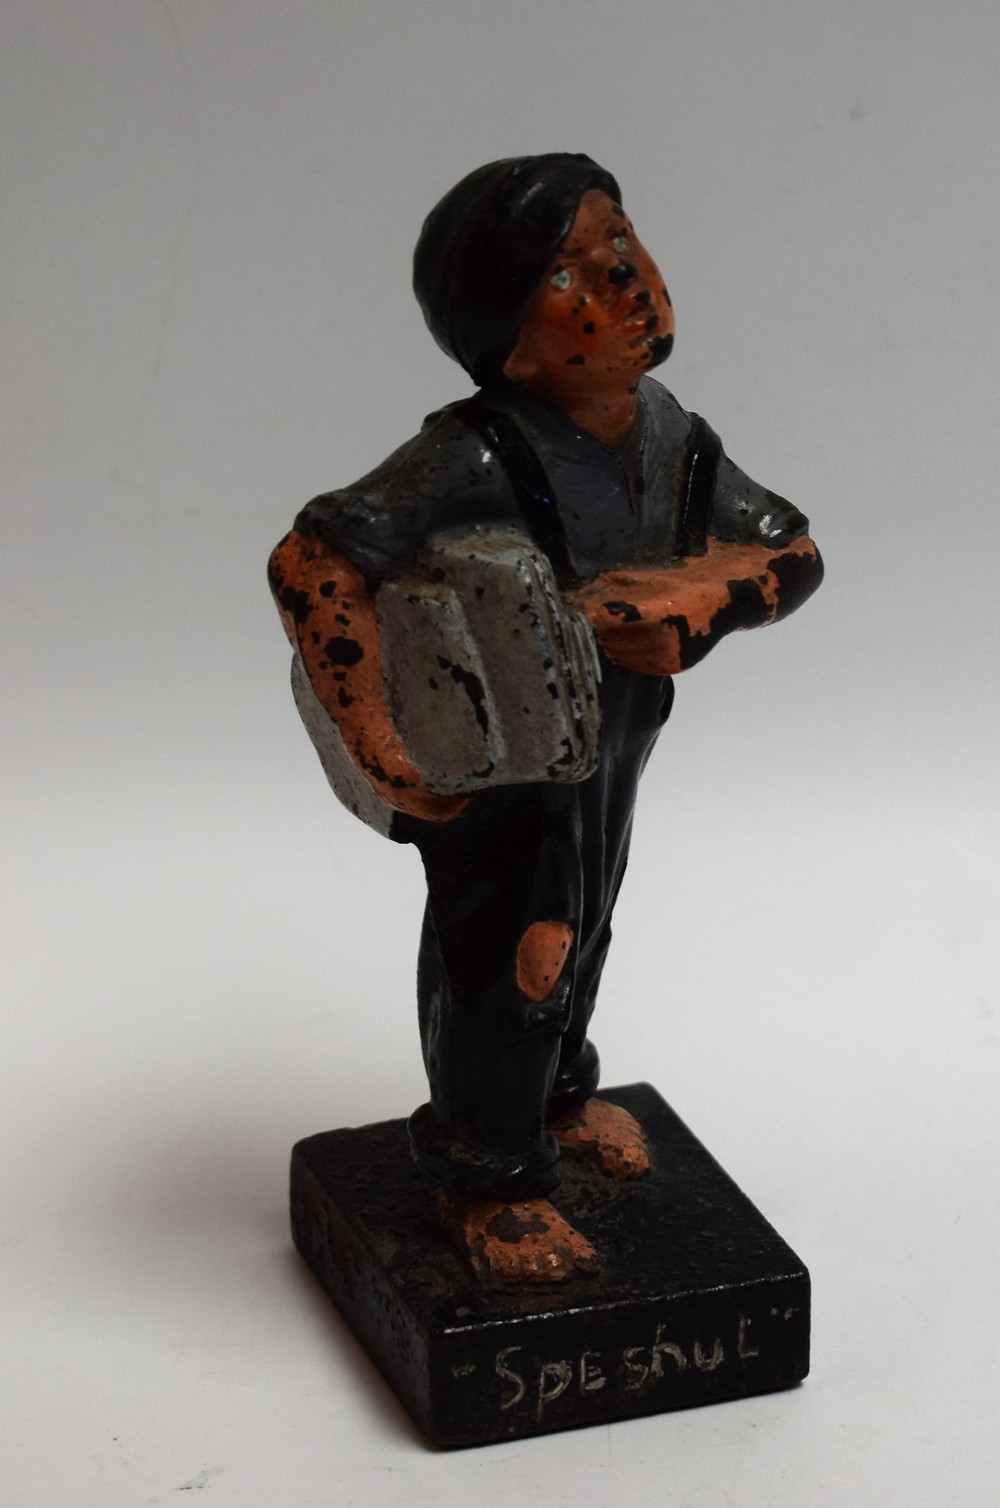 Advertising - Qualcast - a painted cast iron figure of a newspaper boy, 'Speshul',